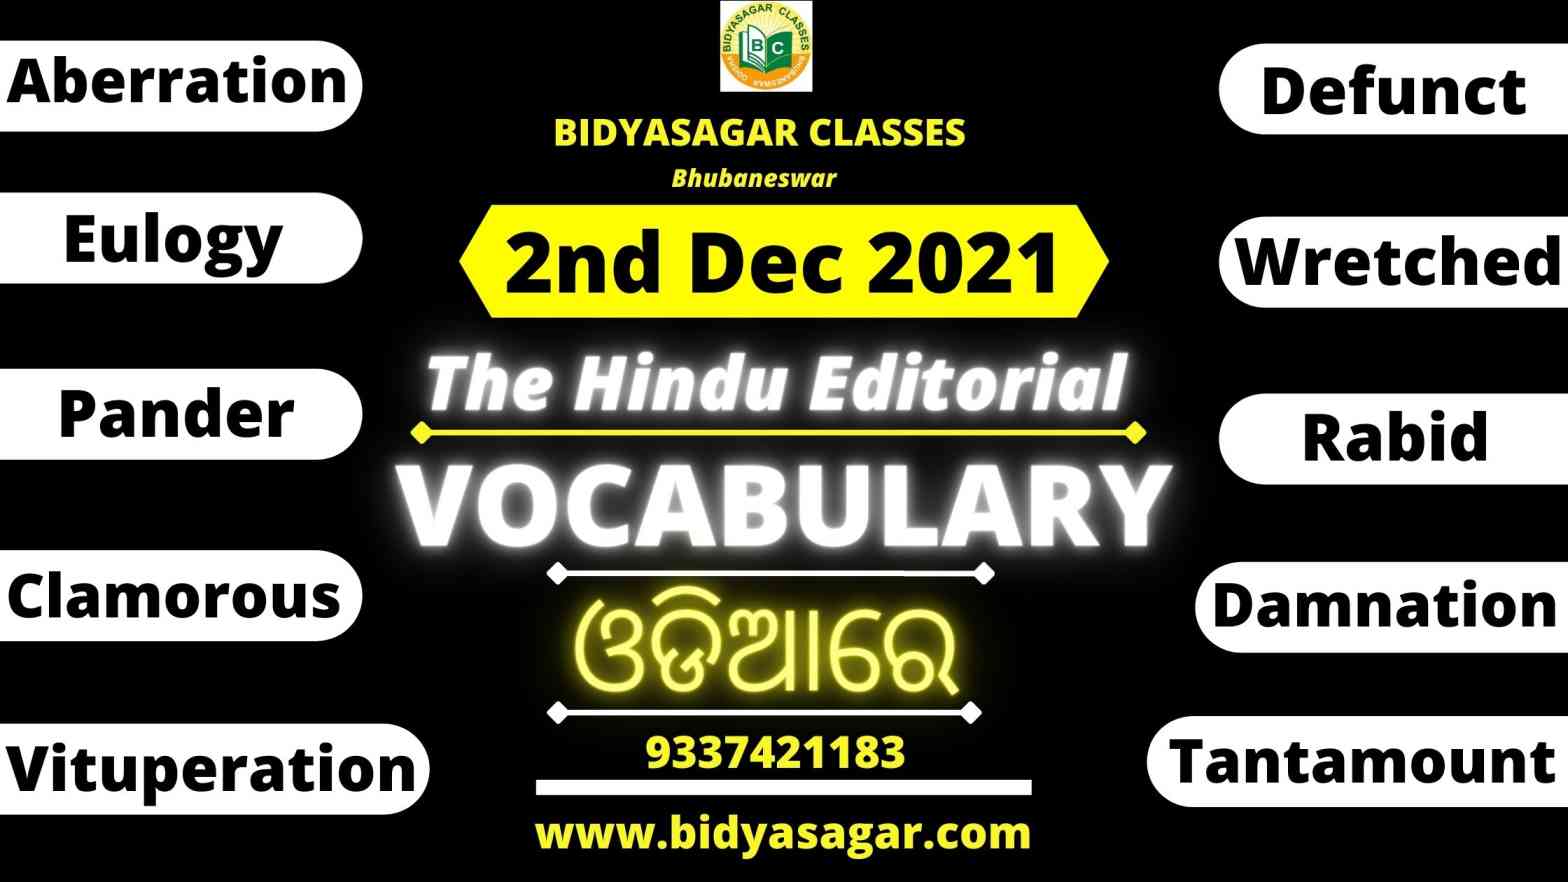 The Hindu Editorial Vocabulary of 2nd December 2021